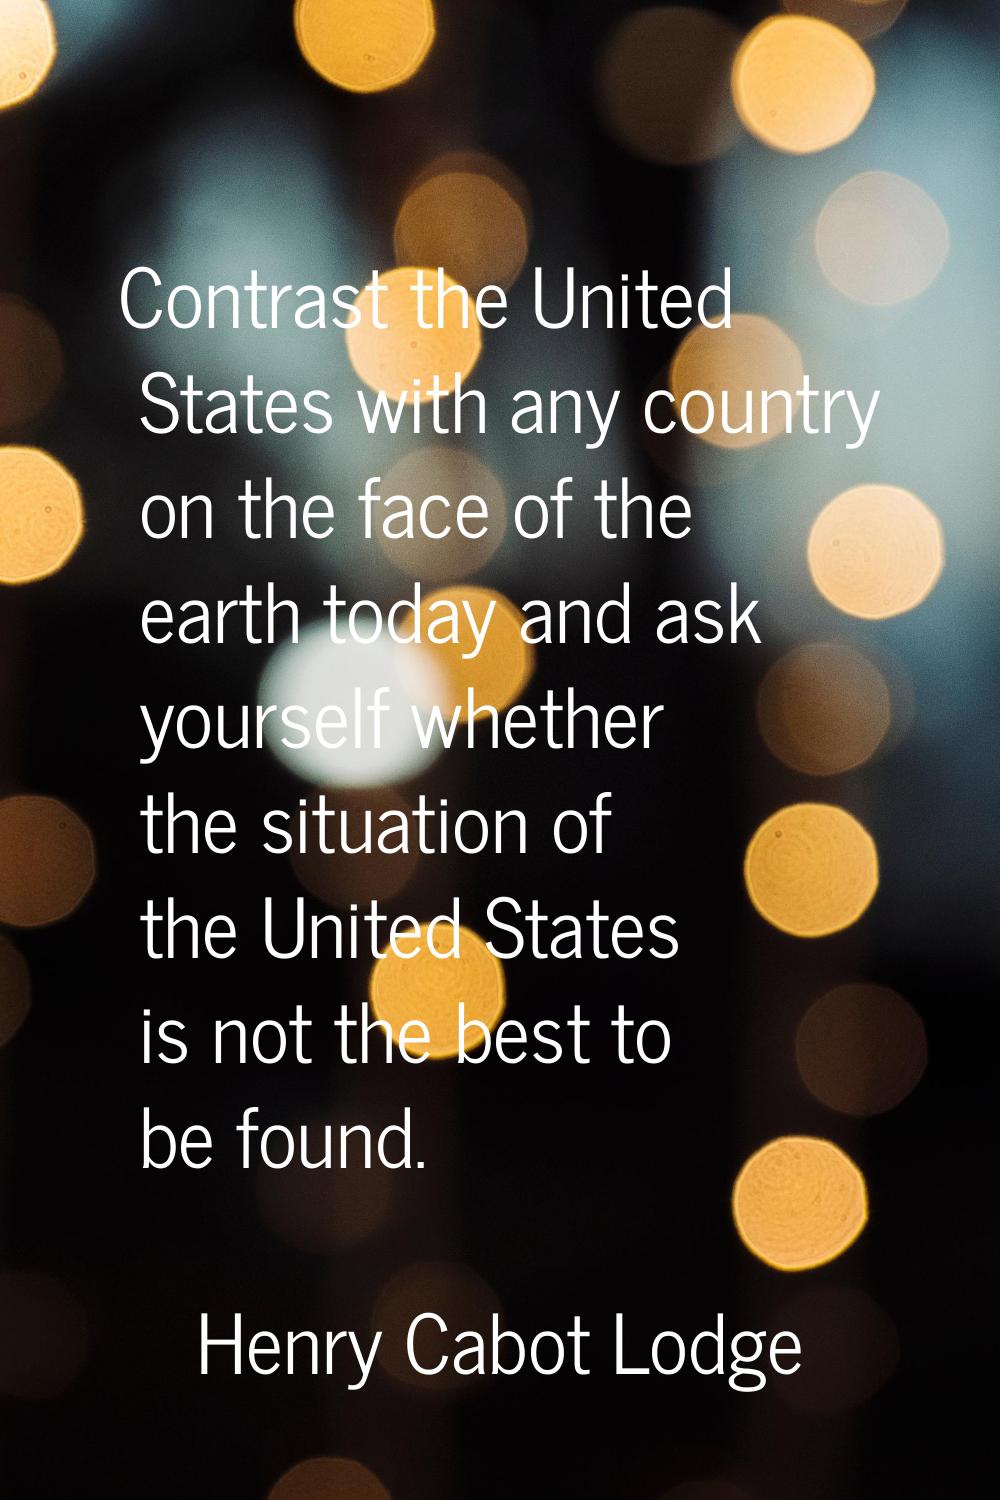 Contrast the United States with any country on the face of the earth today and ask yourself whether